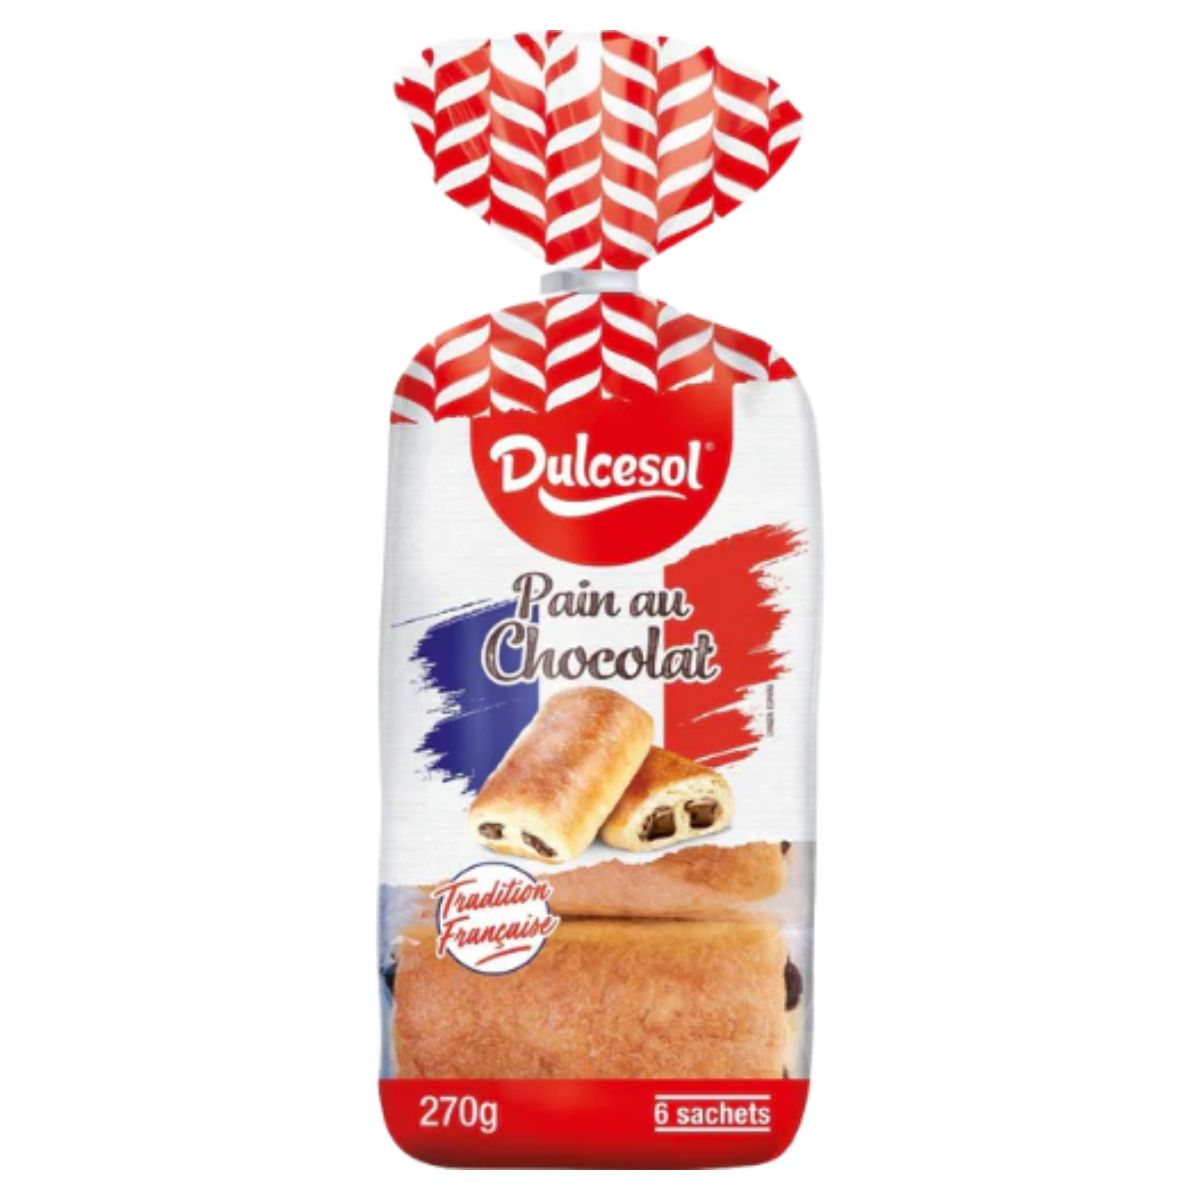 A bag of Dulcesol - Pain Au Chocolat - 6 Pack (270g) french and chocolate croissants.